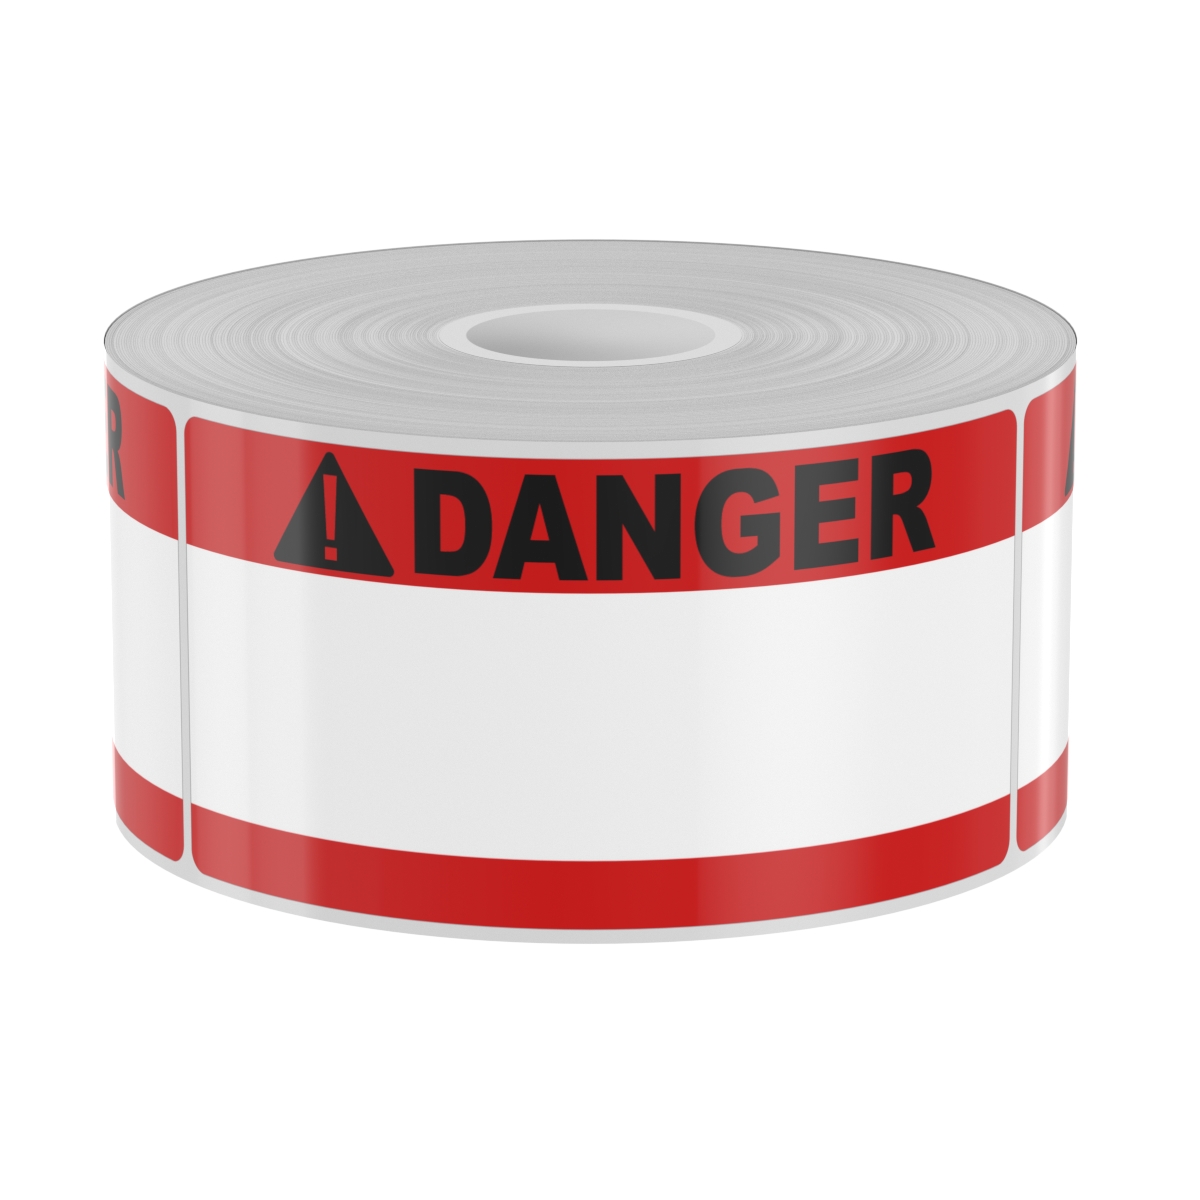 Ask a question about 250 2" x 4" High-Performance Red Double Band with Black Danger